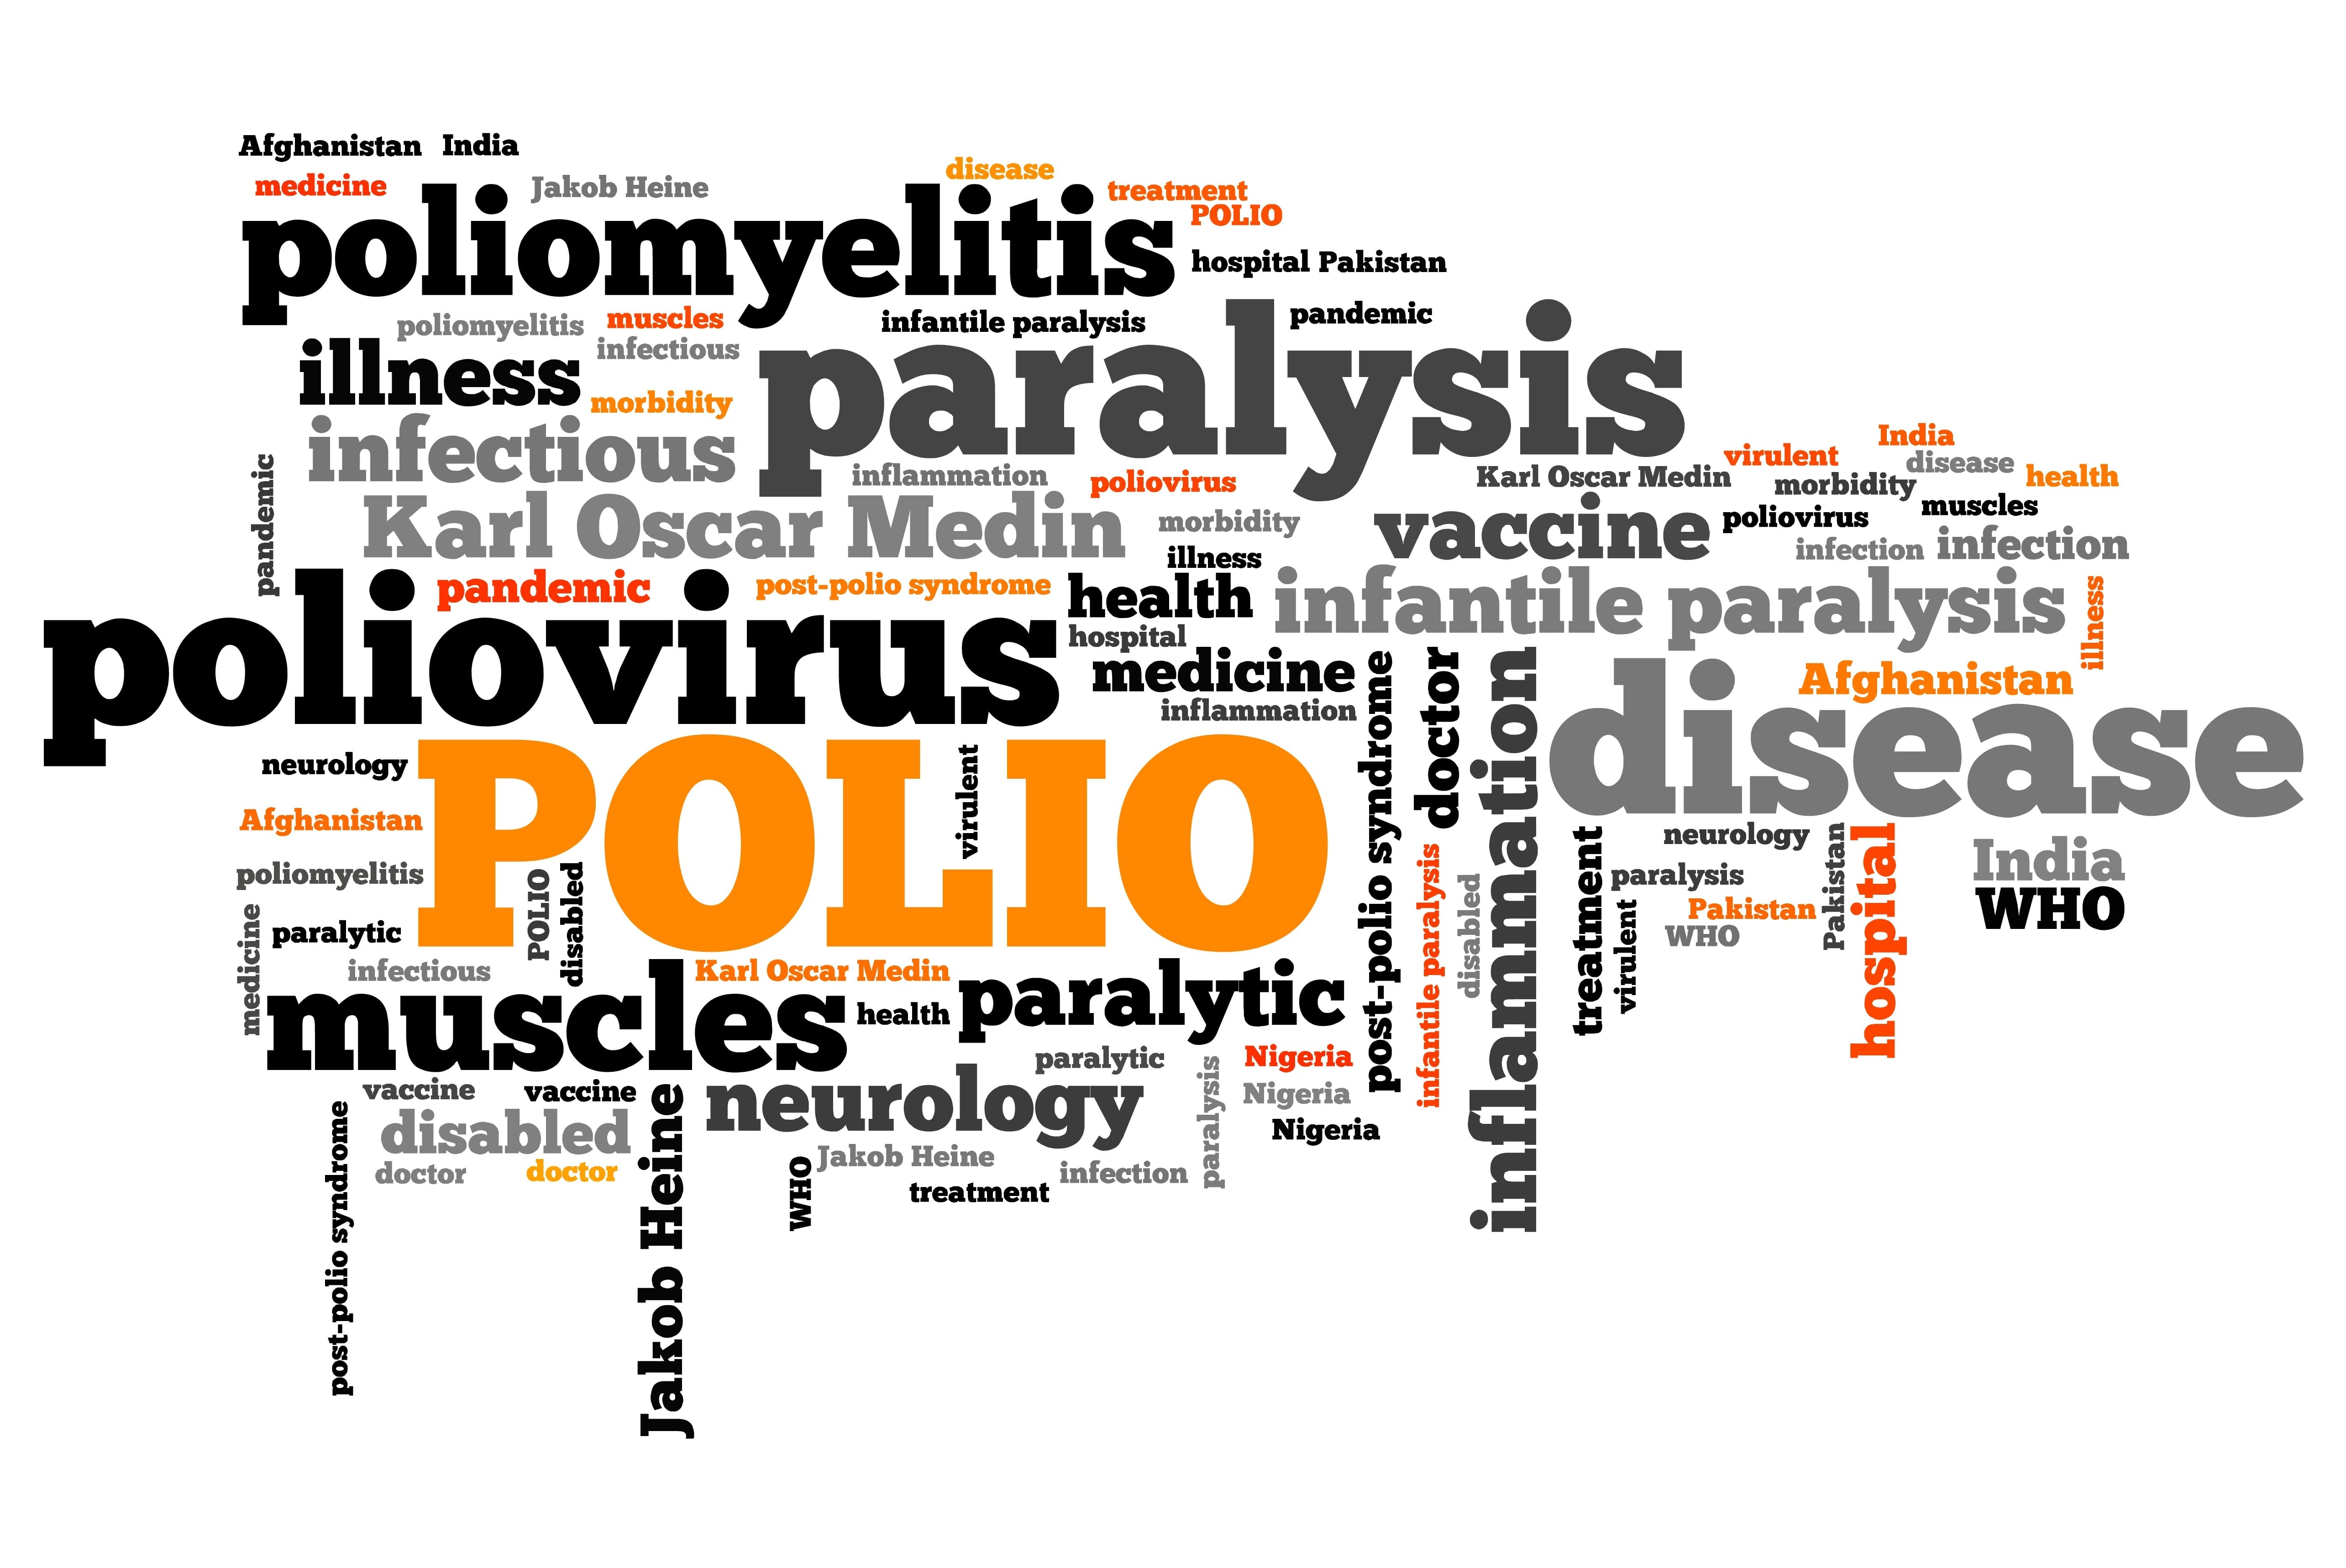 October 24th World Polio Day | End Polio Now